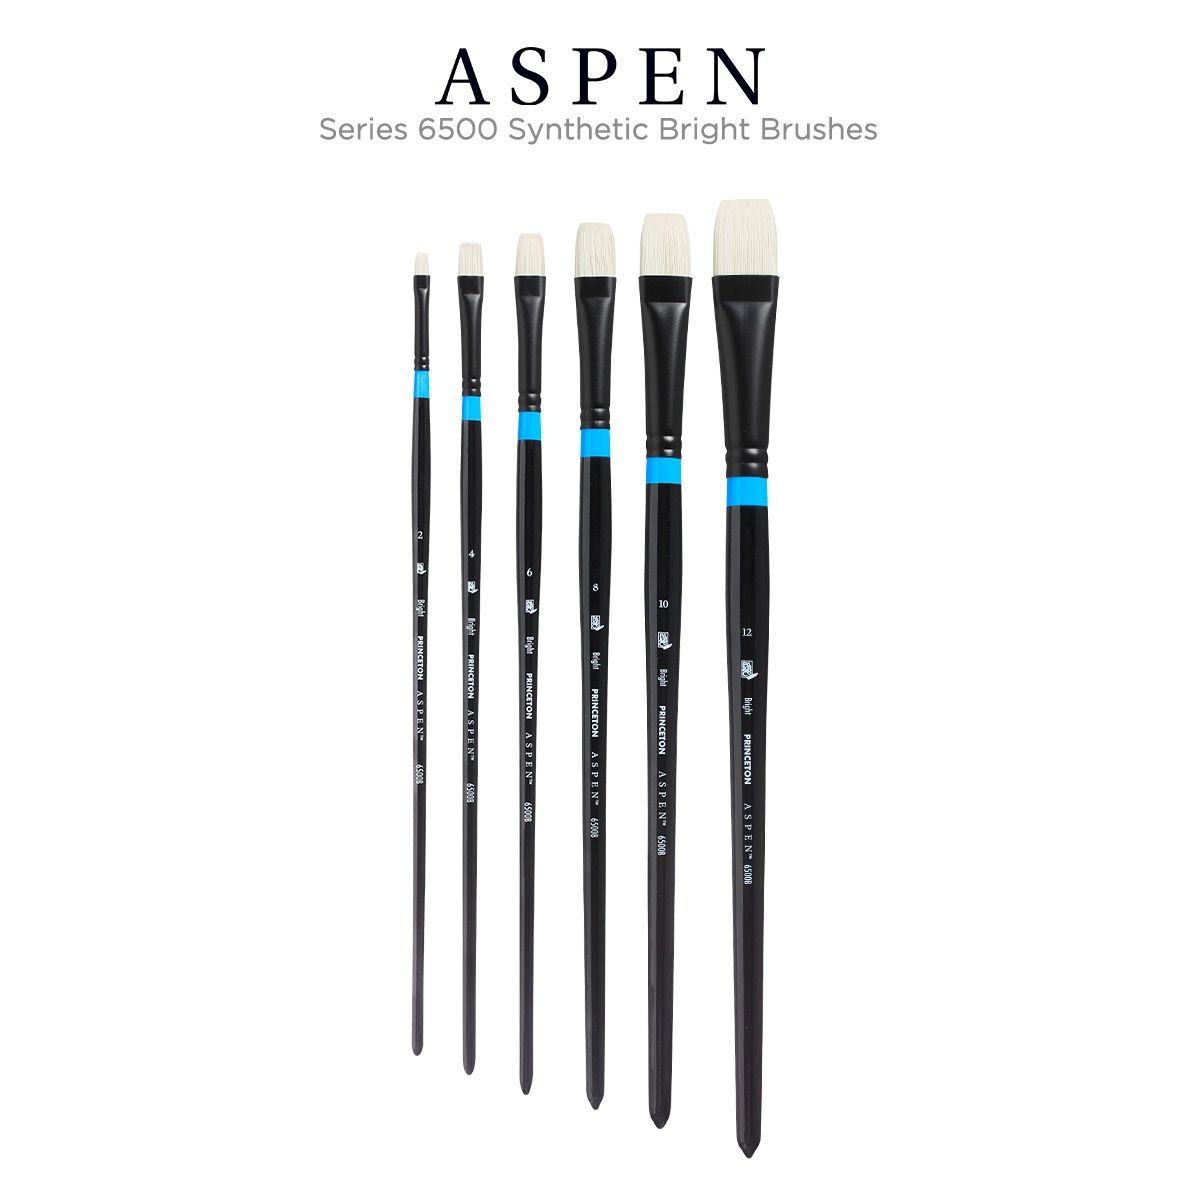 Aspen Series 6500 Synthetic Bright Brushes